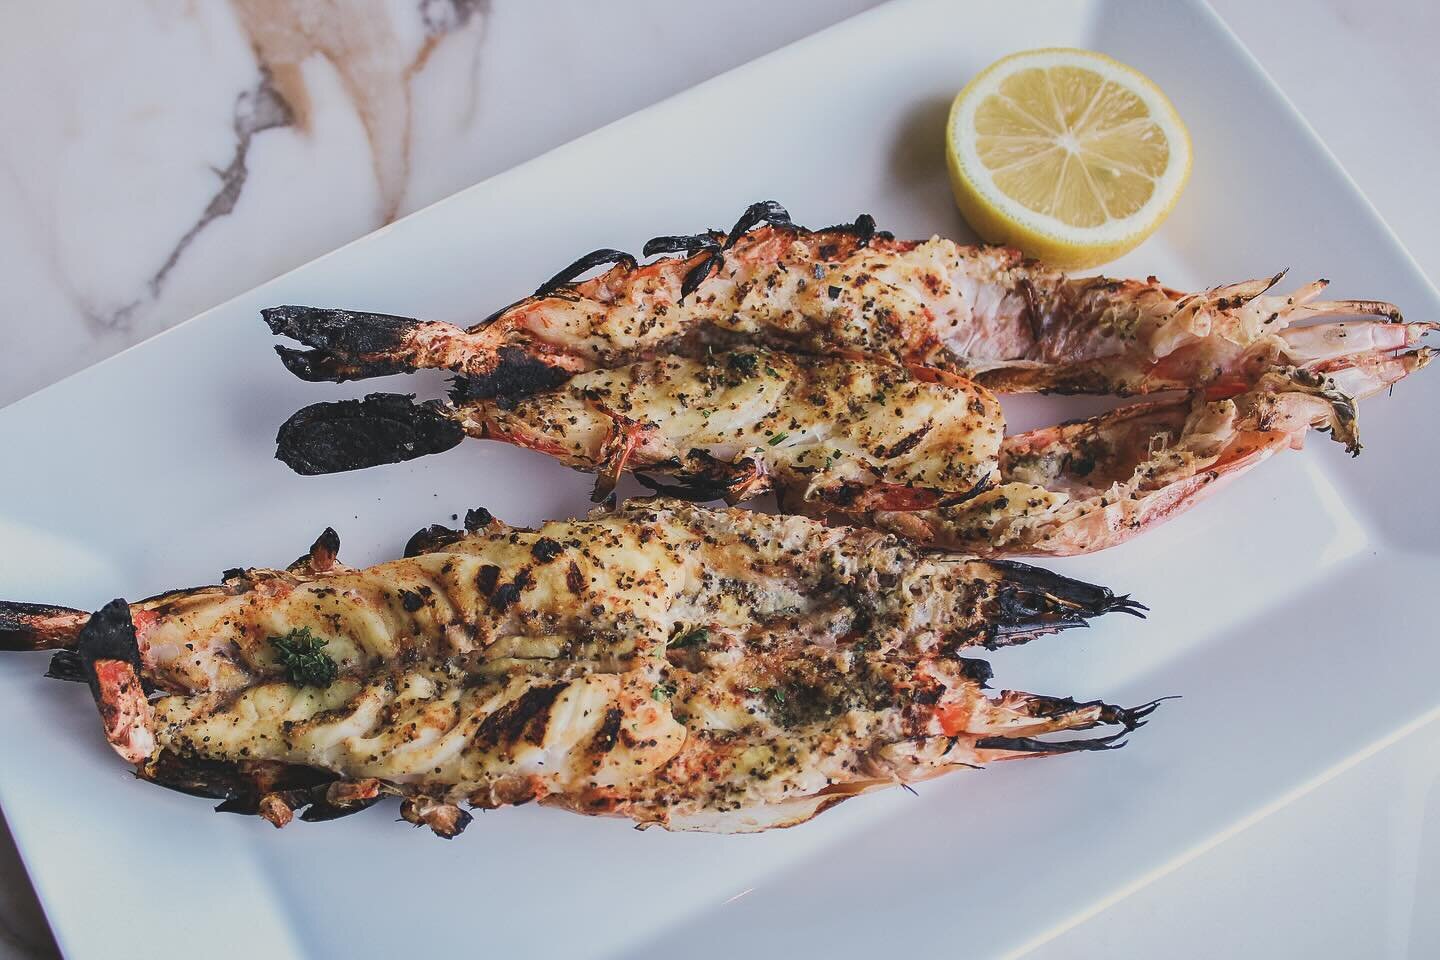 More seafood, more options! We&rsquo;ve added a new U4 Jumbo Tiger Prawns platter to our menu. 2 Whole Prawns, cut in half, &amp; seasoned with our blend of spices. 

Join us nightly at 5pm!